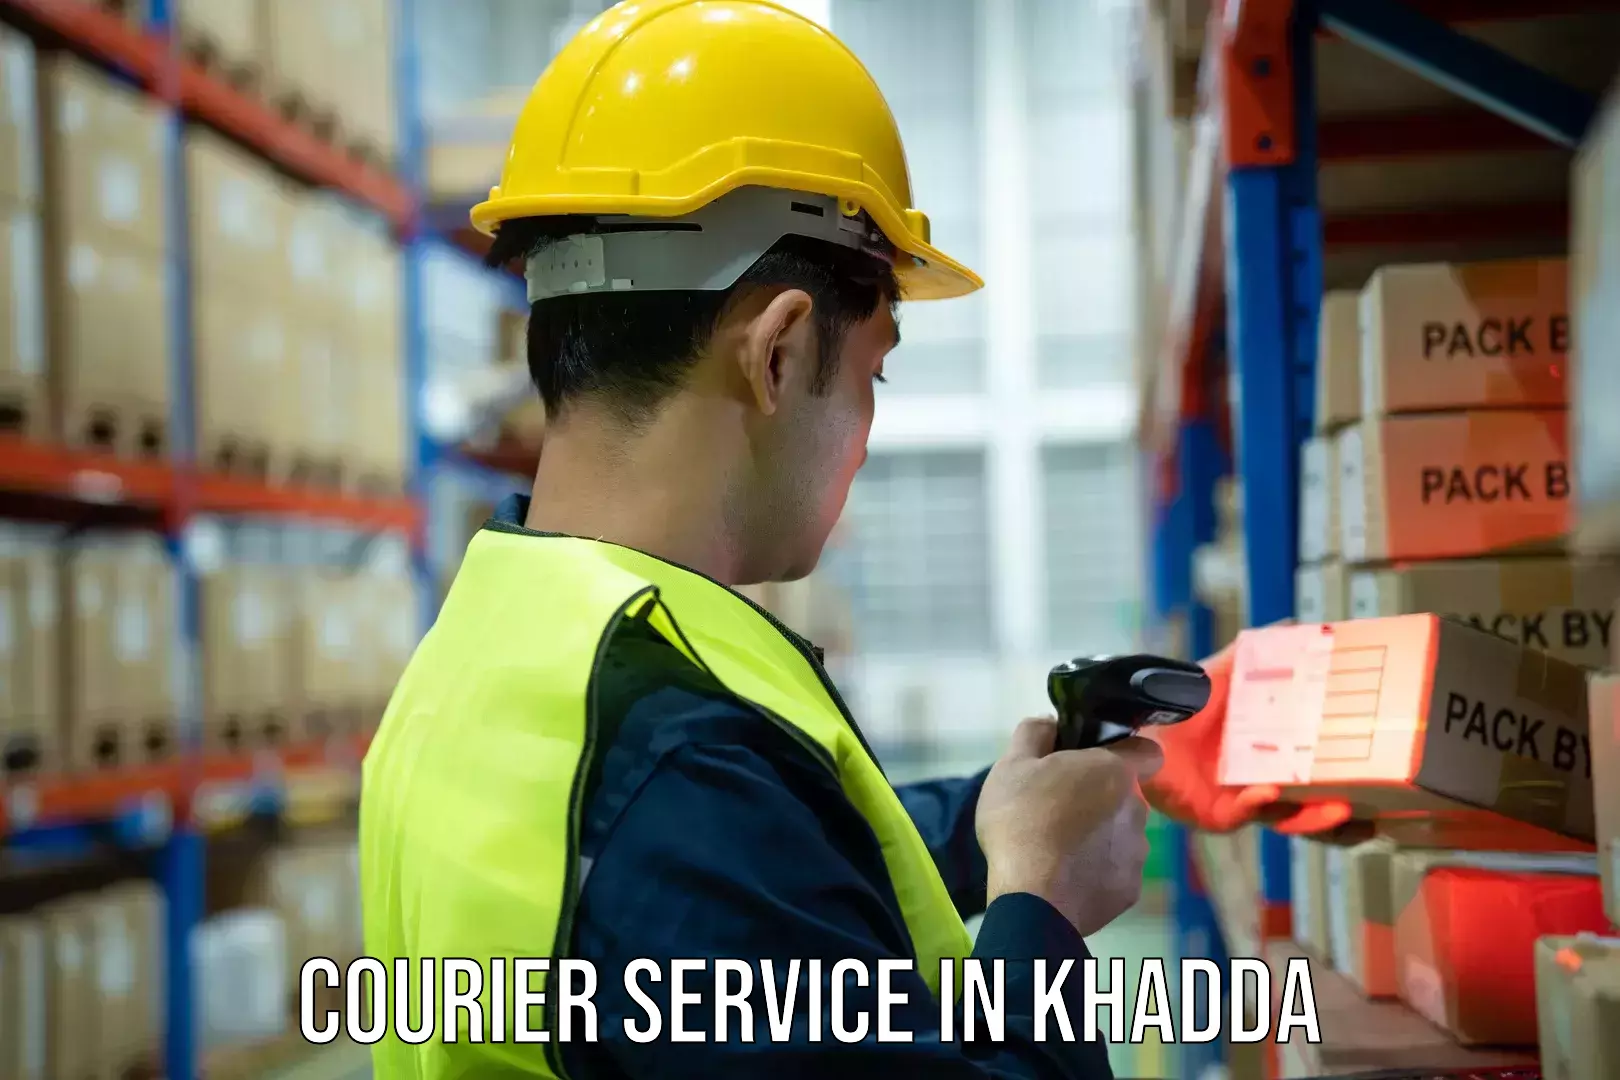 Reliable shipping solutions in Khadda